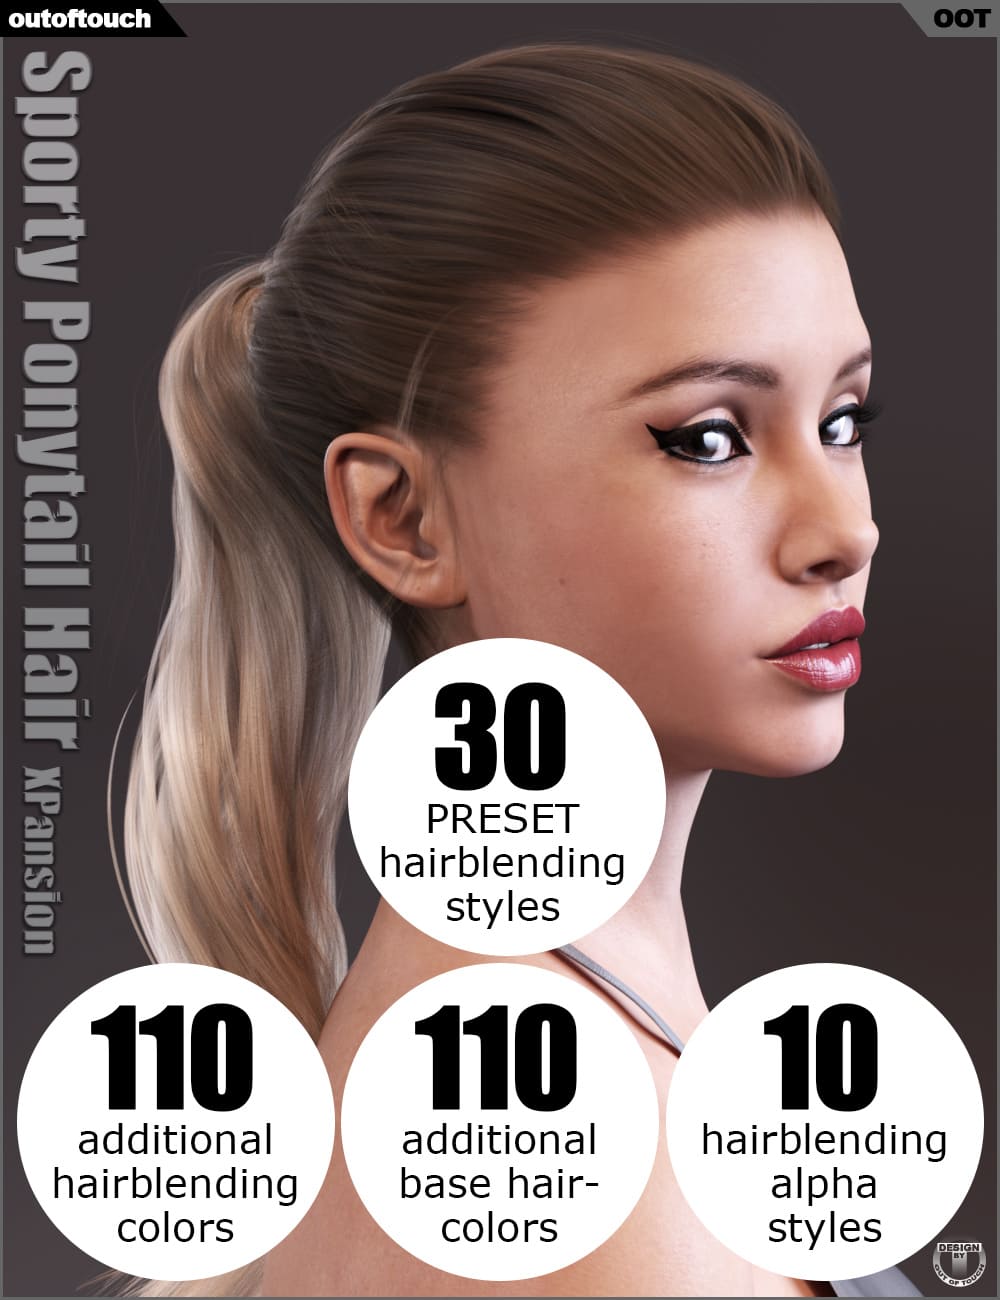 Sporty Ponytail Hair and OOT Hairblending 2.0 Texture XPansion_DAZ3D下载站